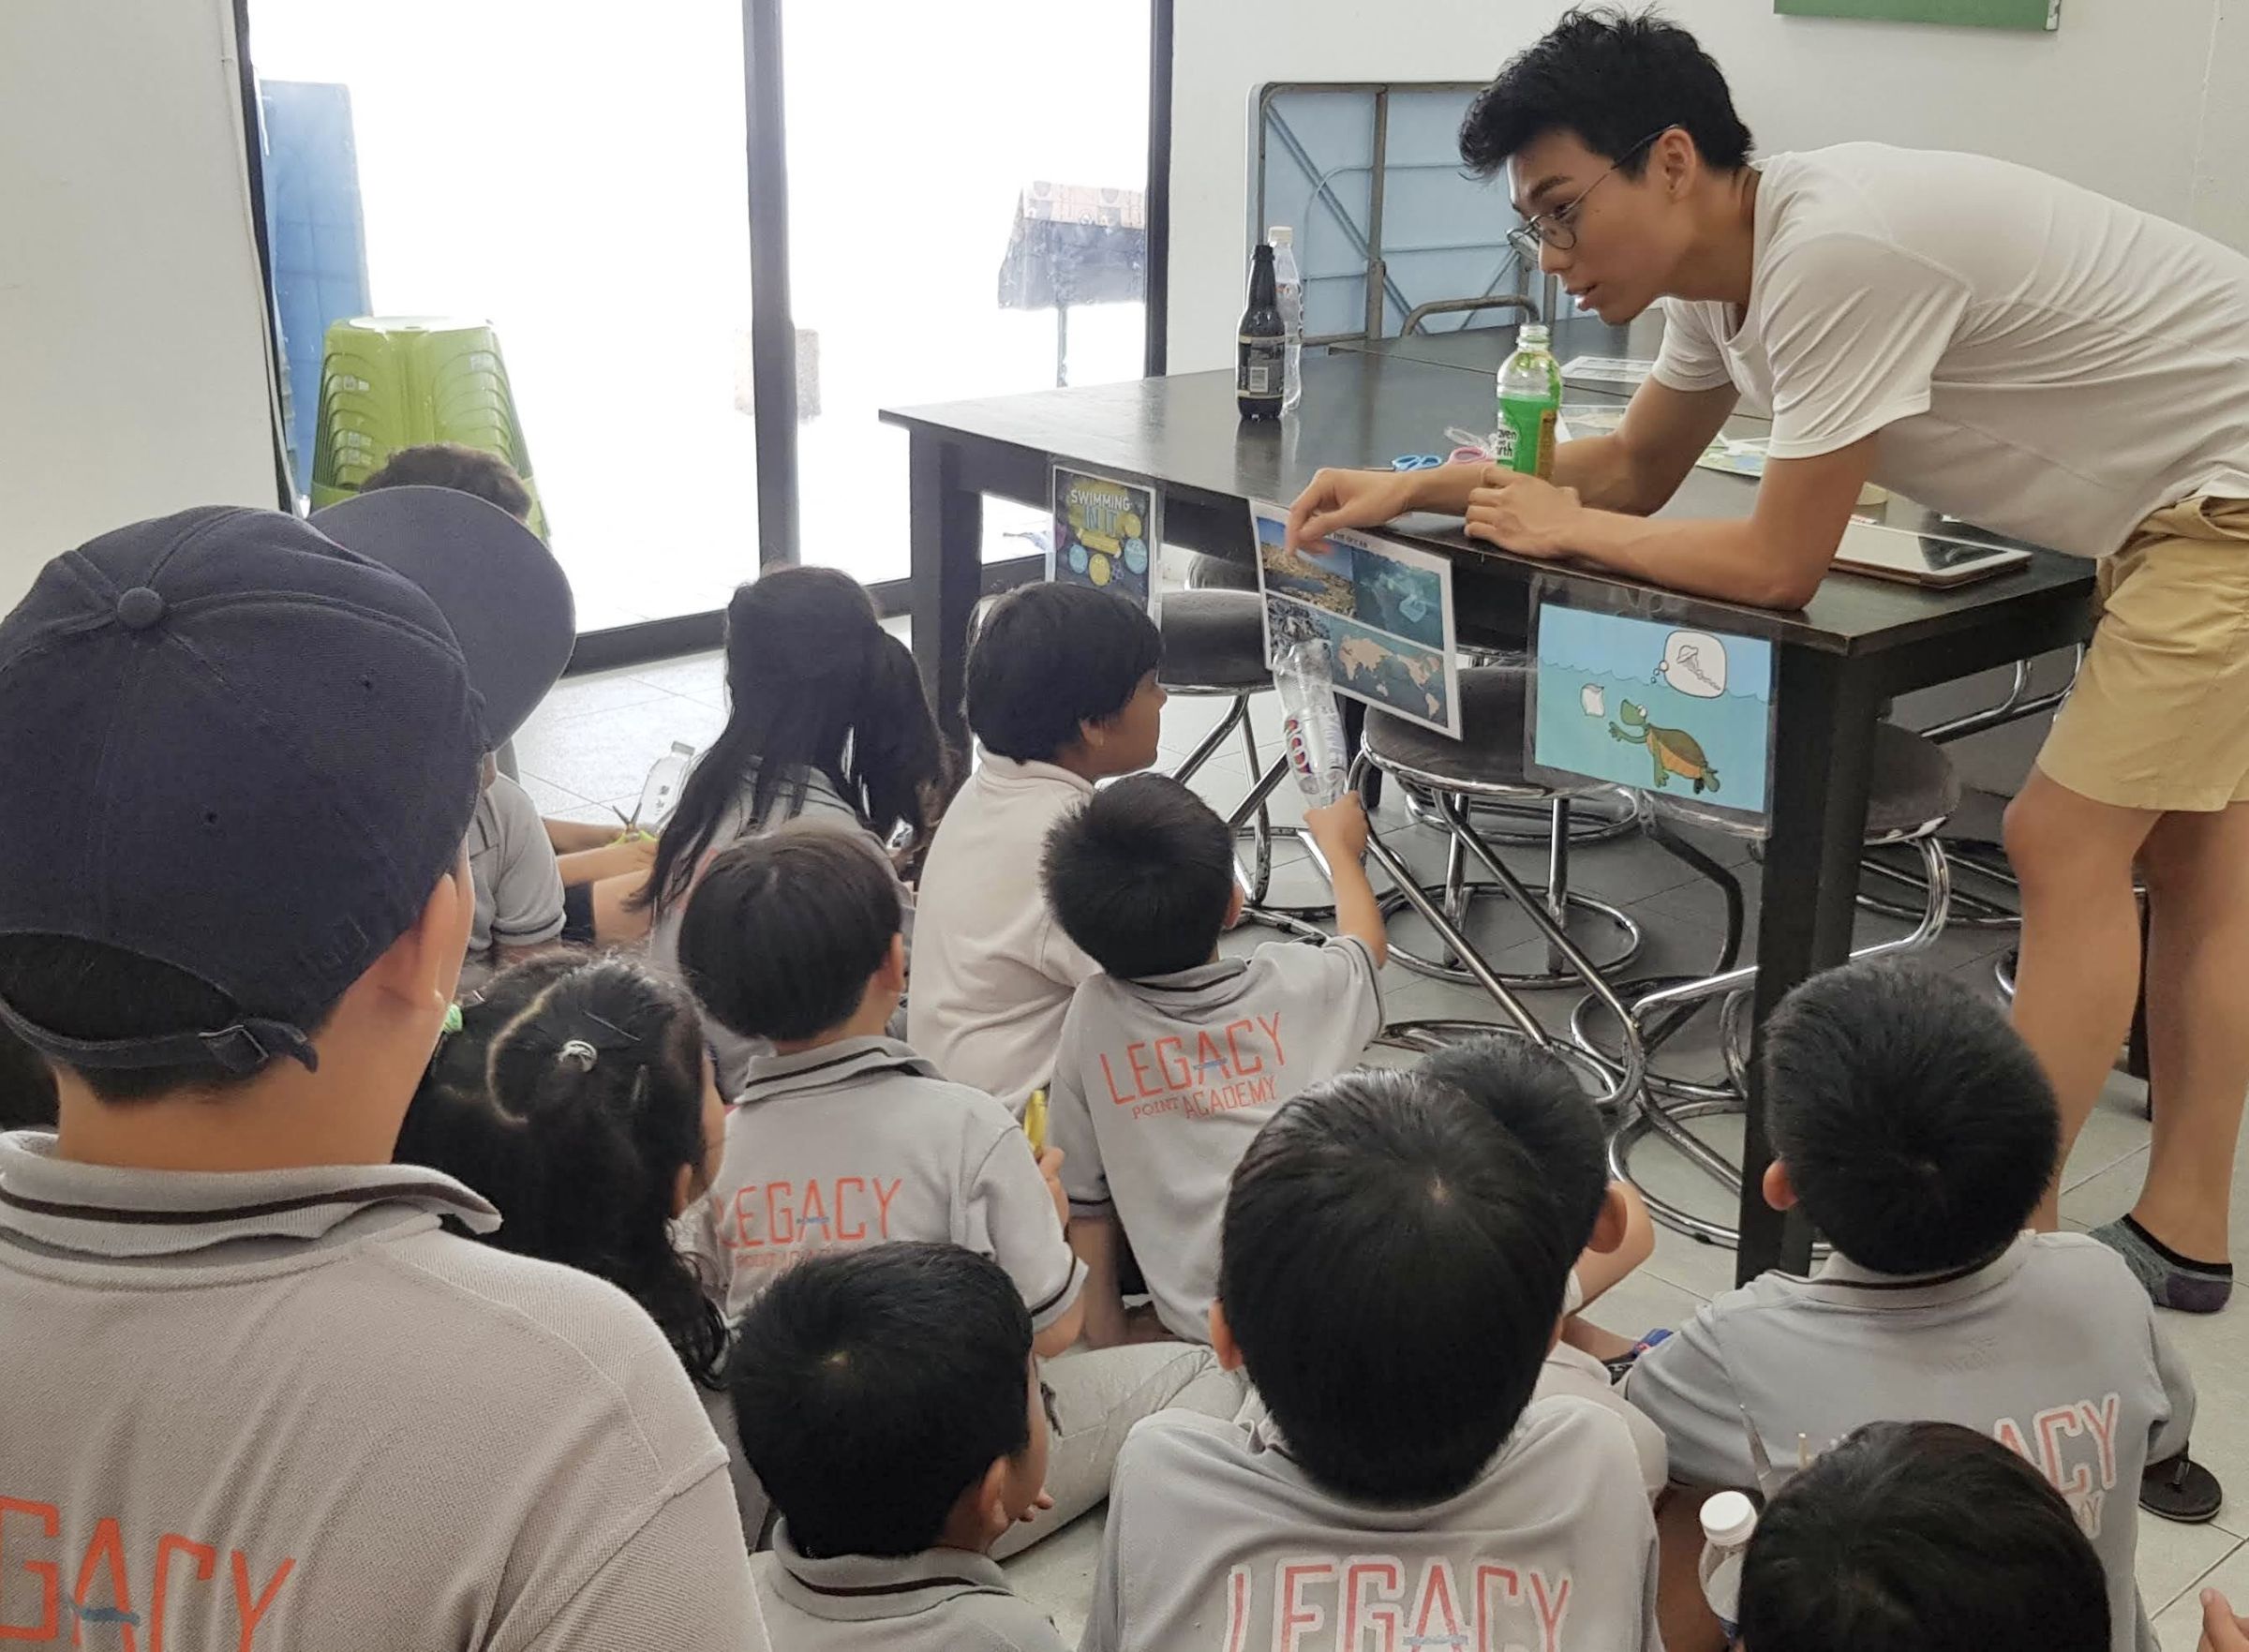 Educating children on plastic pollution and local environmentalism